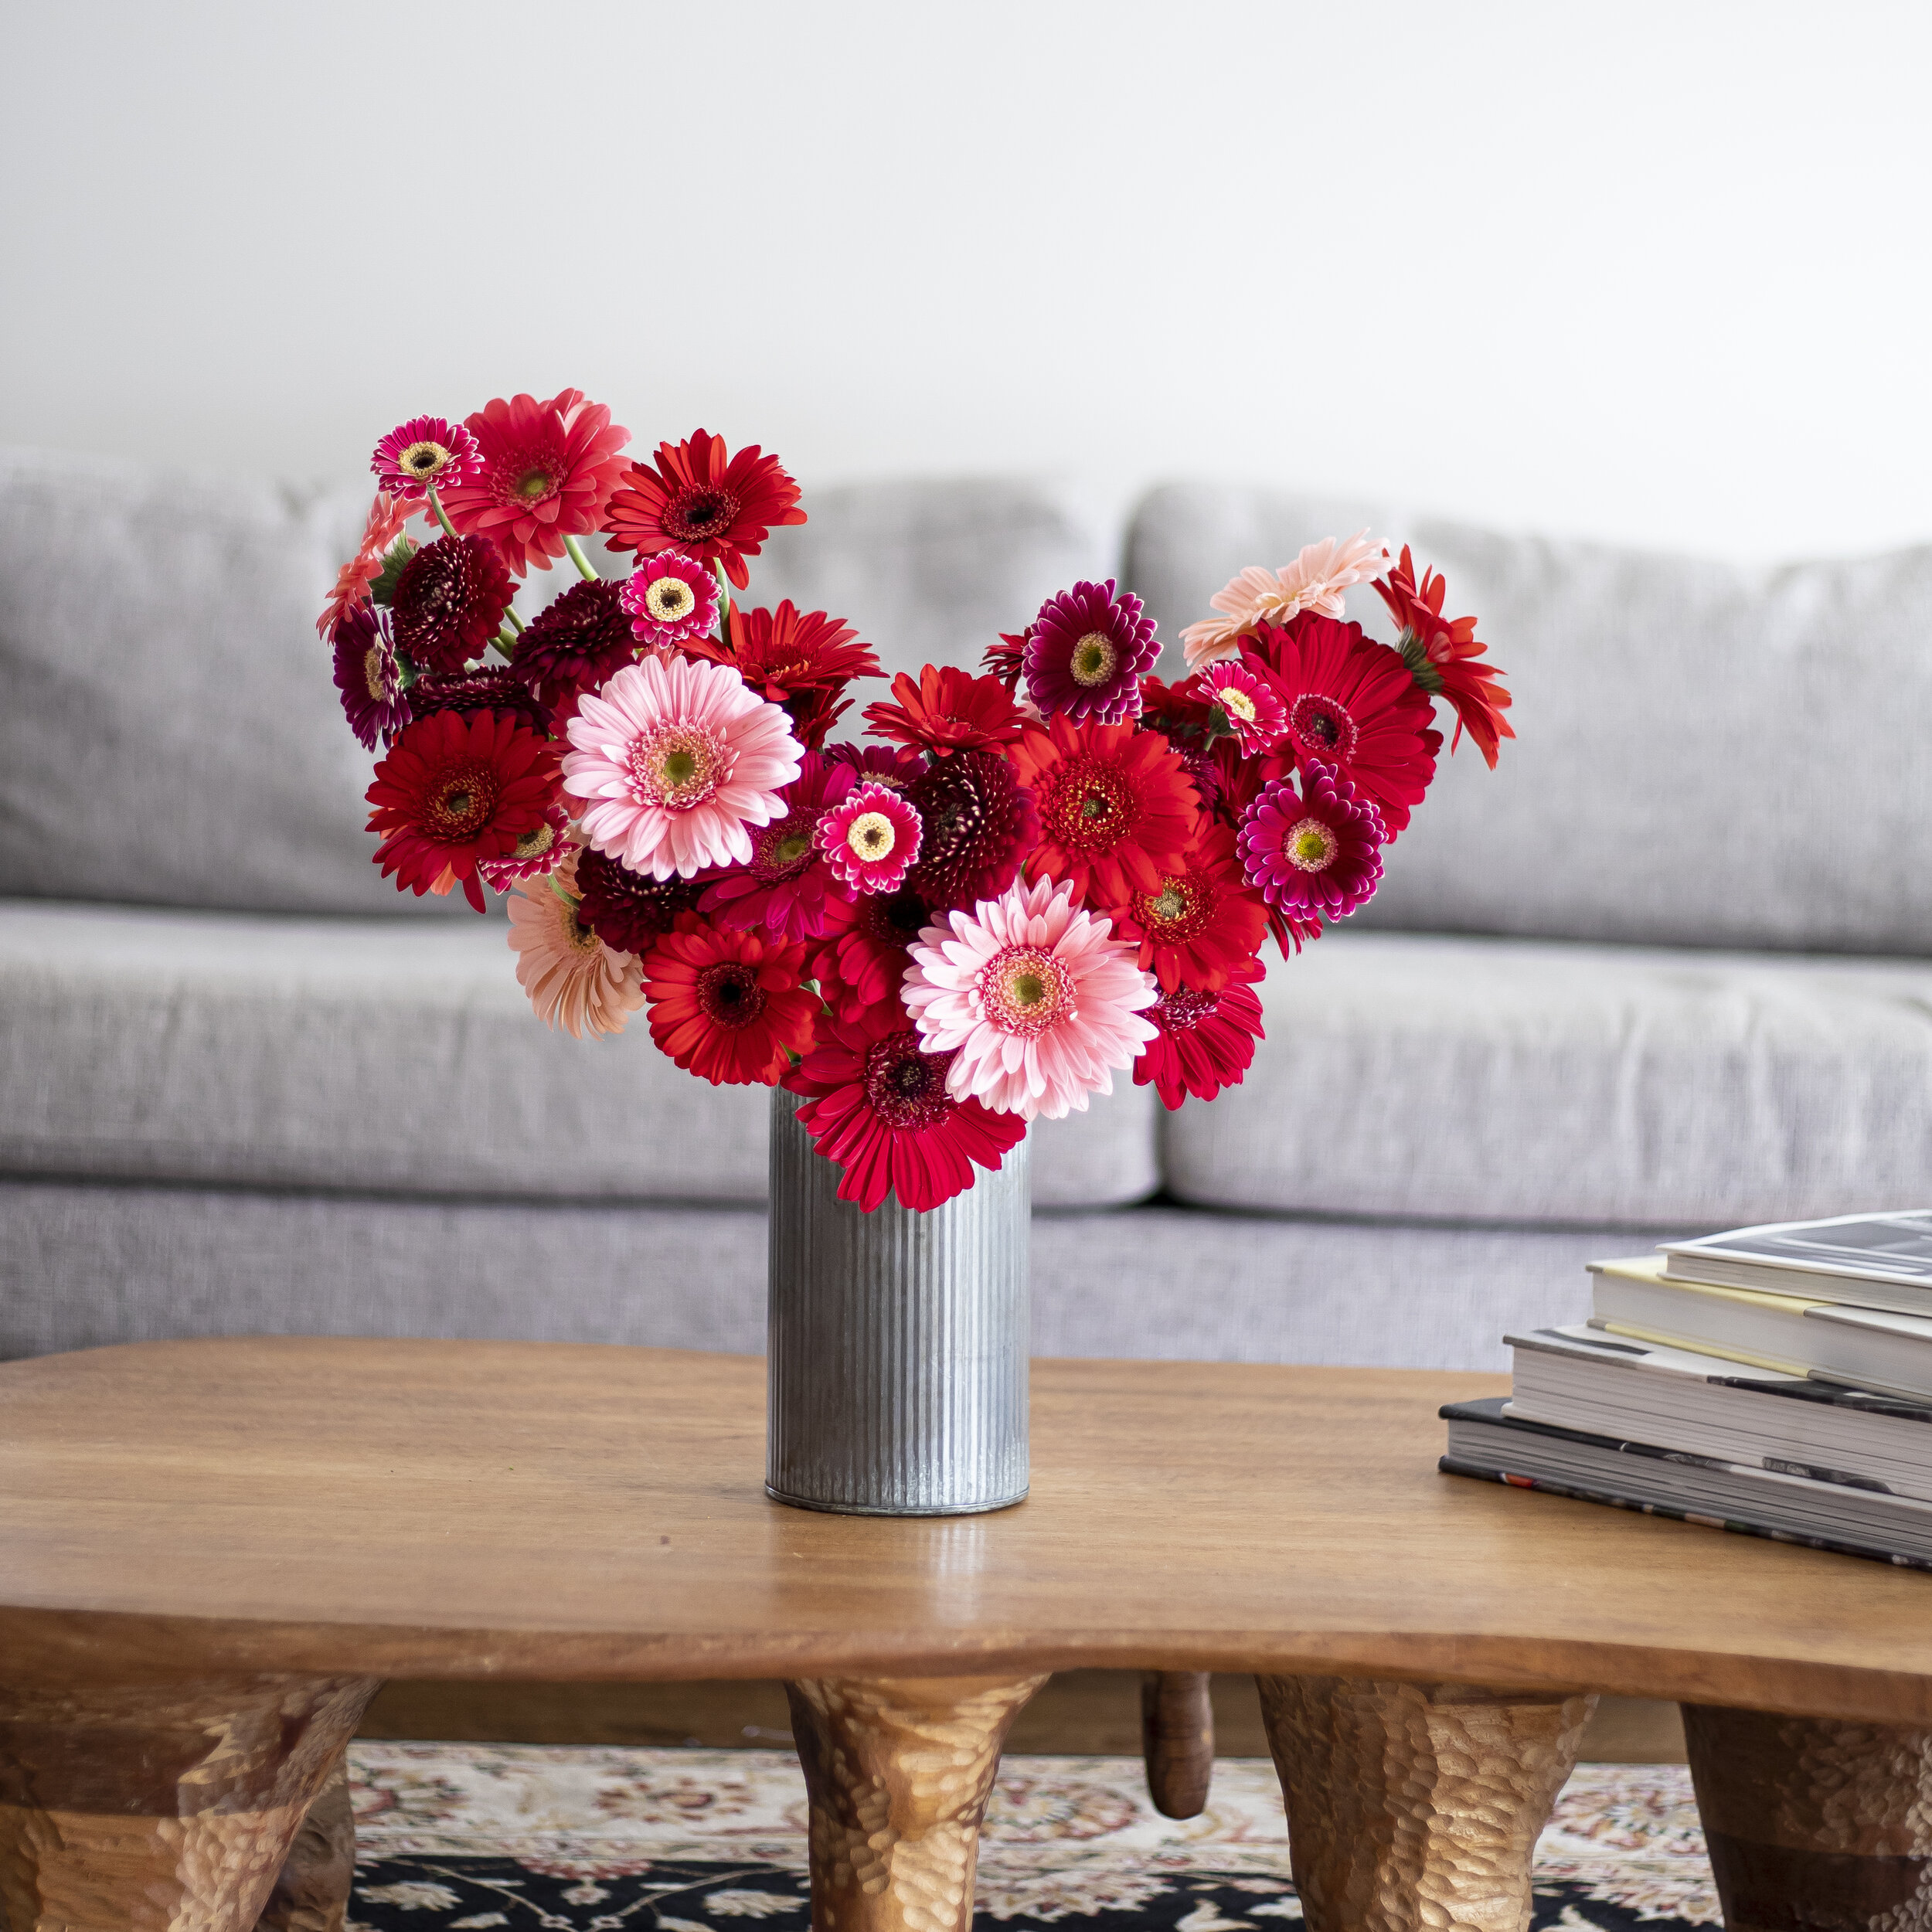 A bouquet of red and pink daisies in a tin vase on a wooden table near a couch